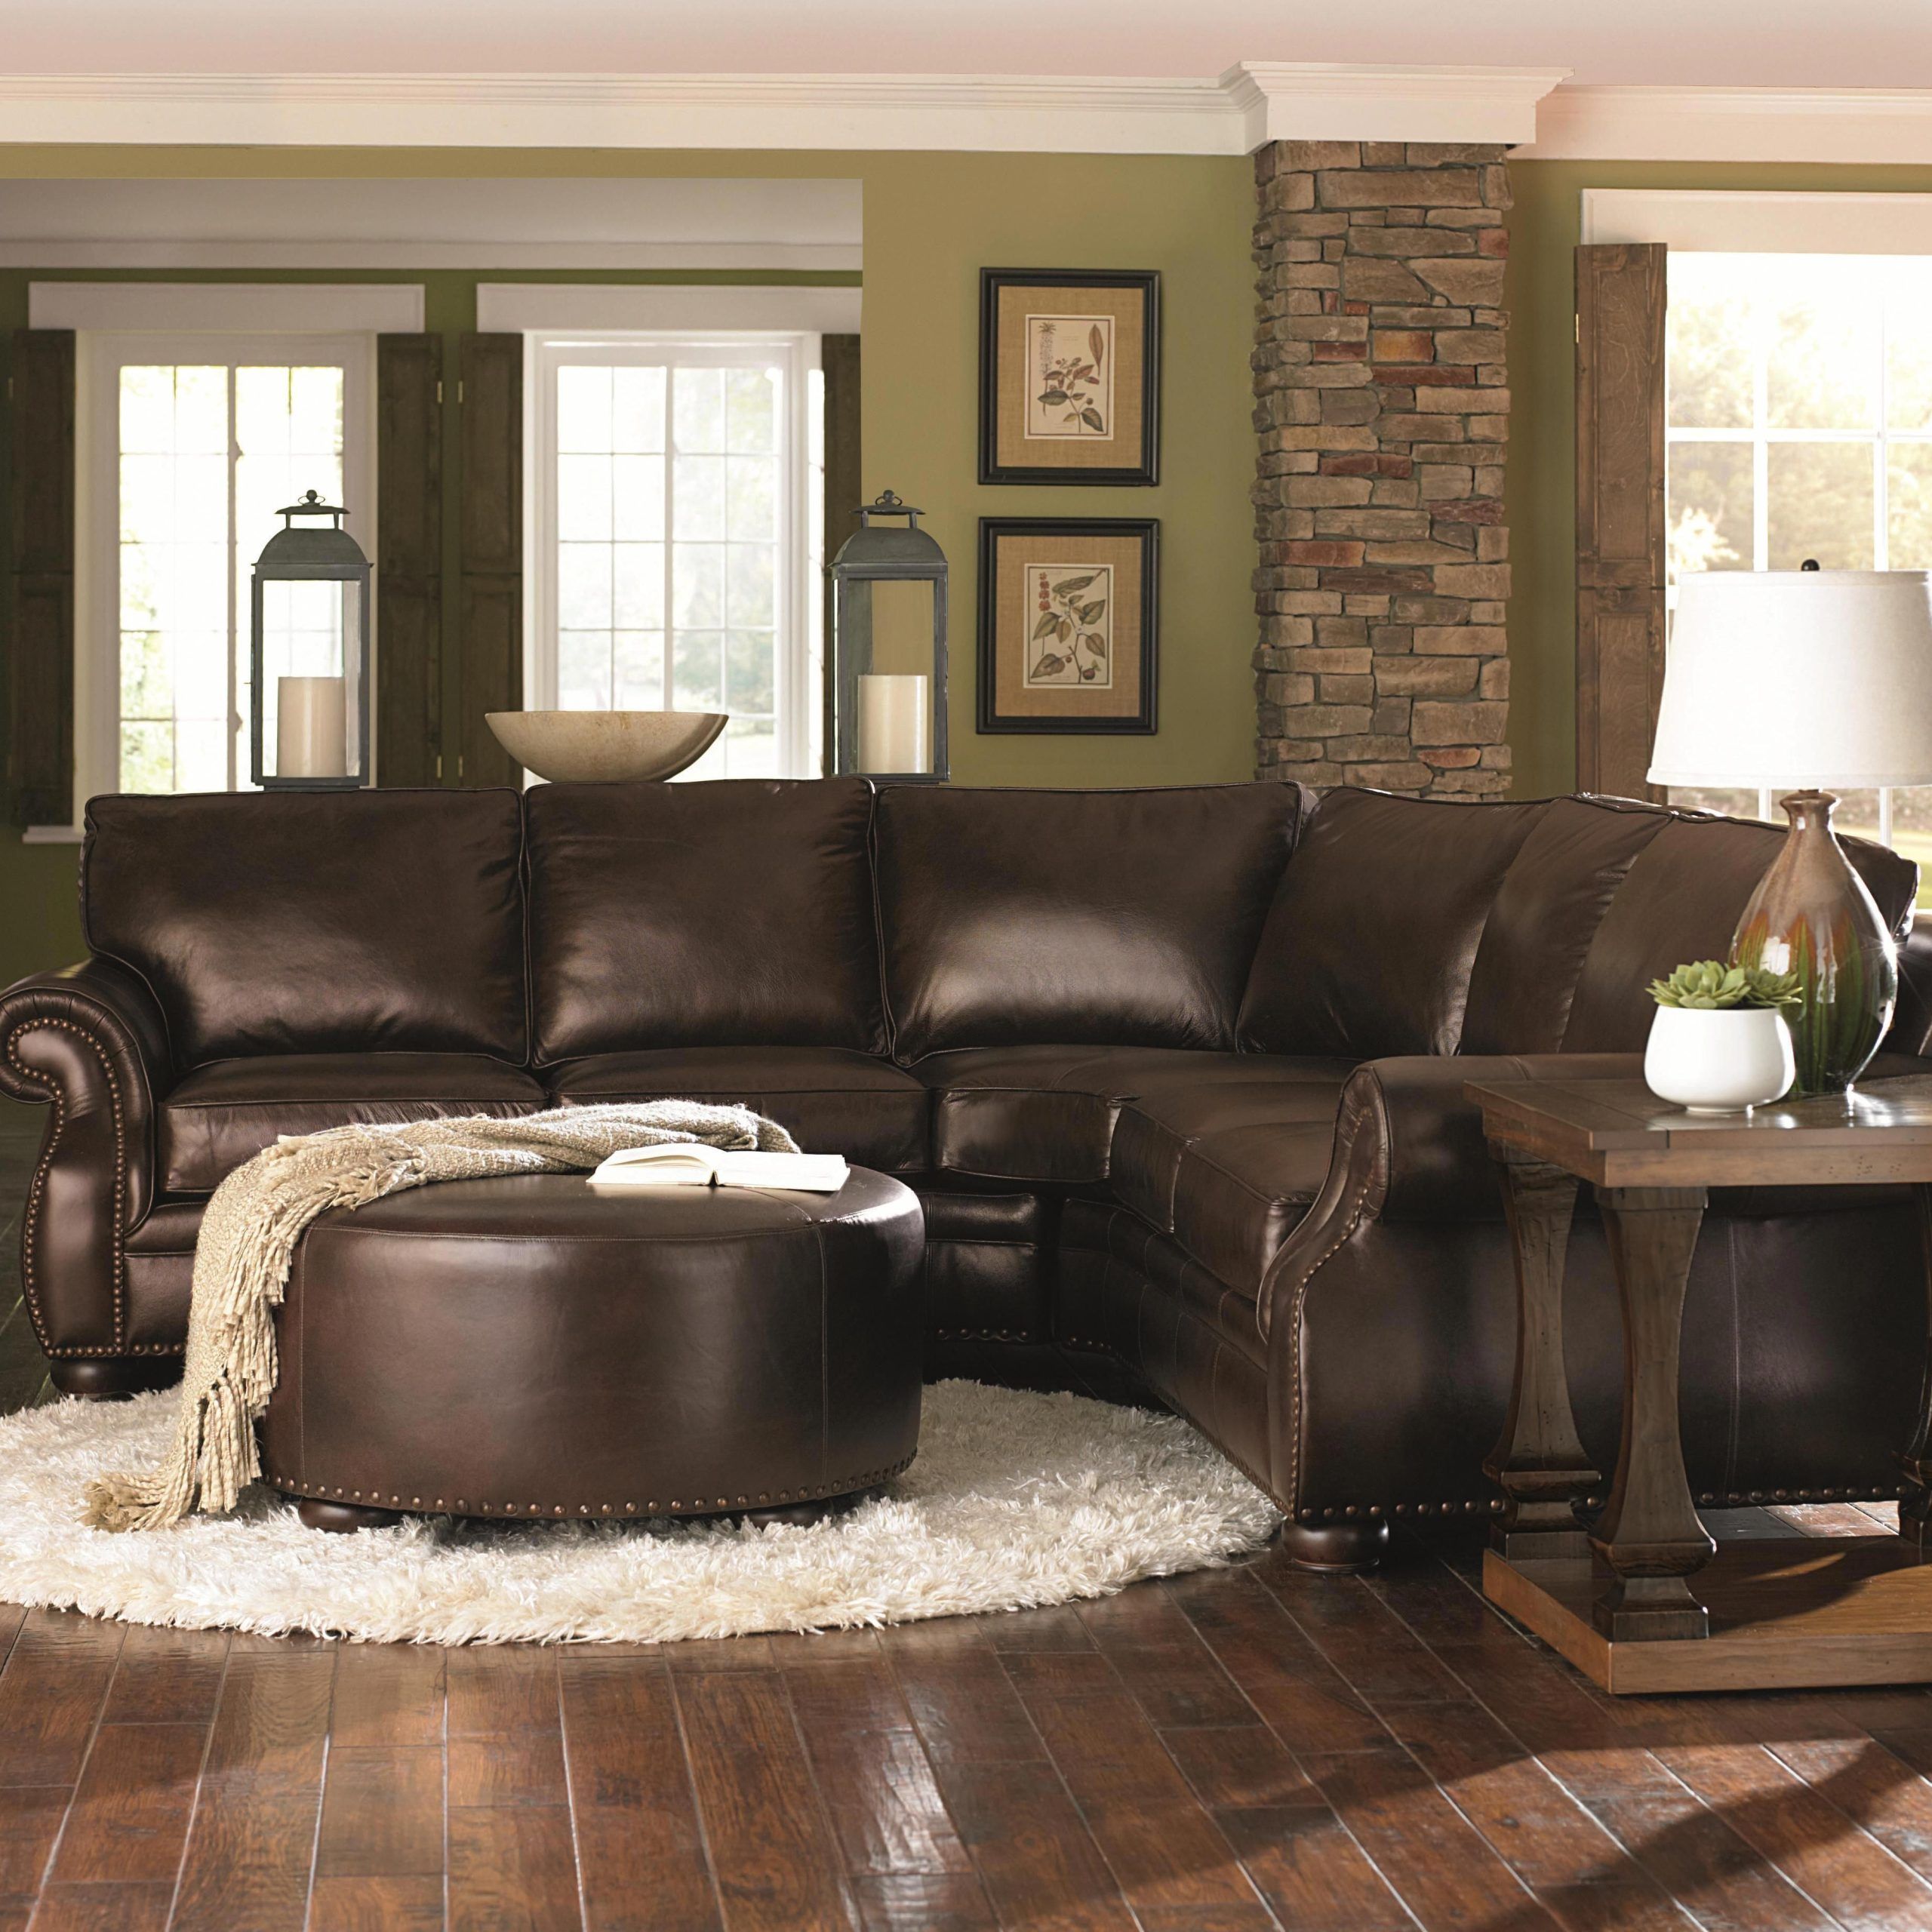 2018 Sofas With Ottomans In Brown Inside Chocolate Brown Leather Sectional W/ Round Ottoman   Love Love Love (View 7 of 15)